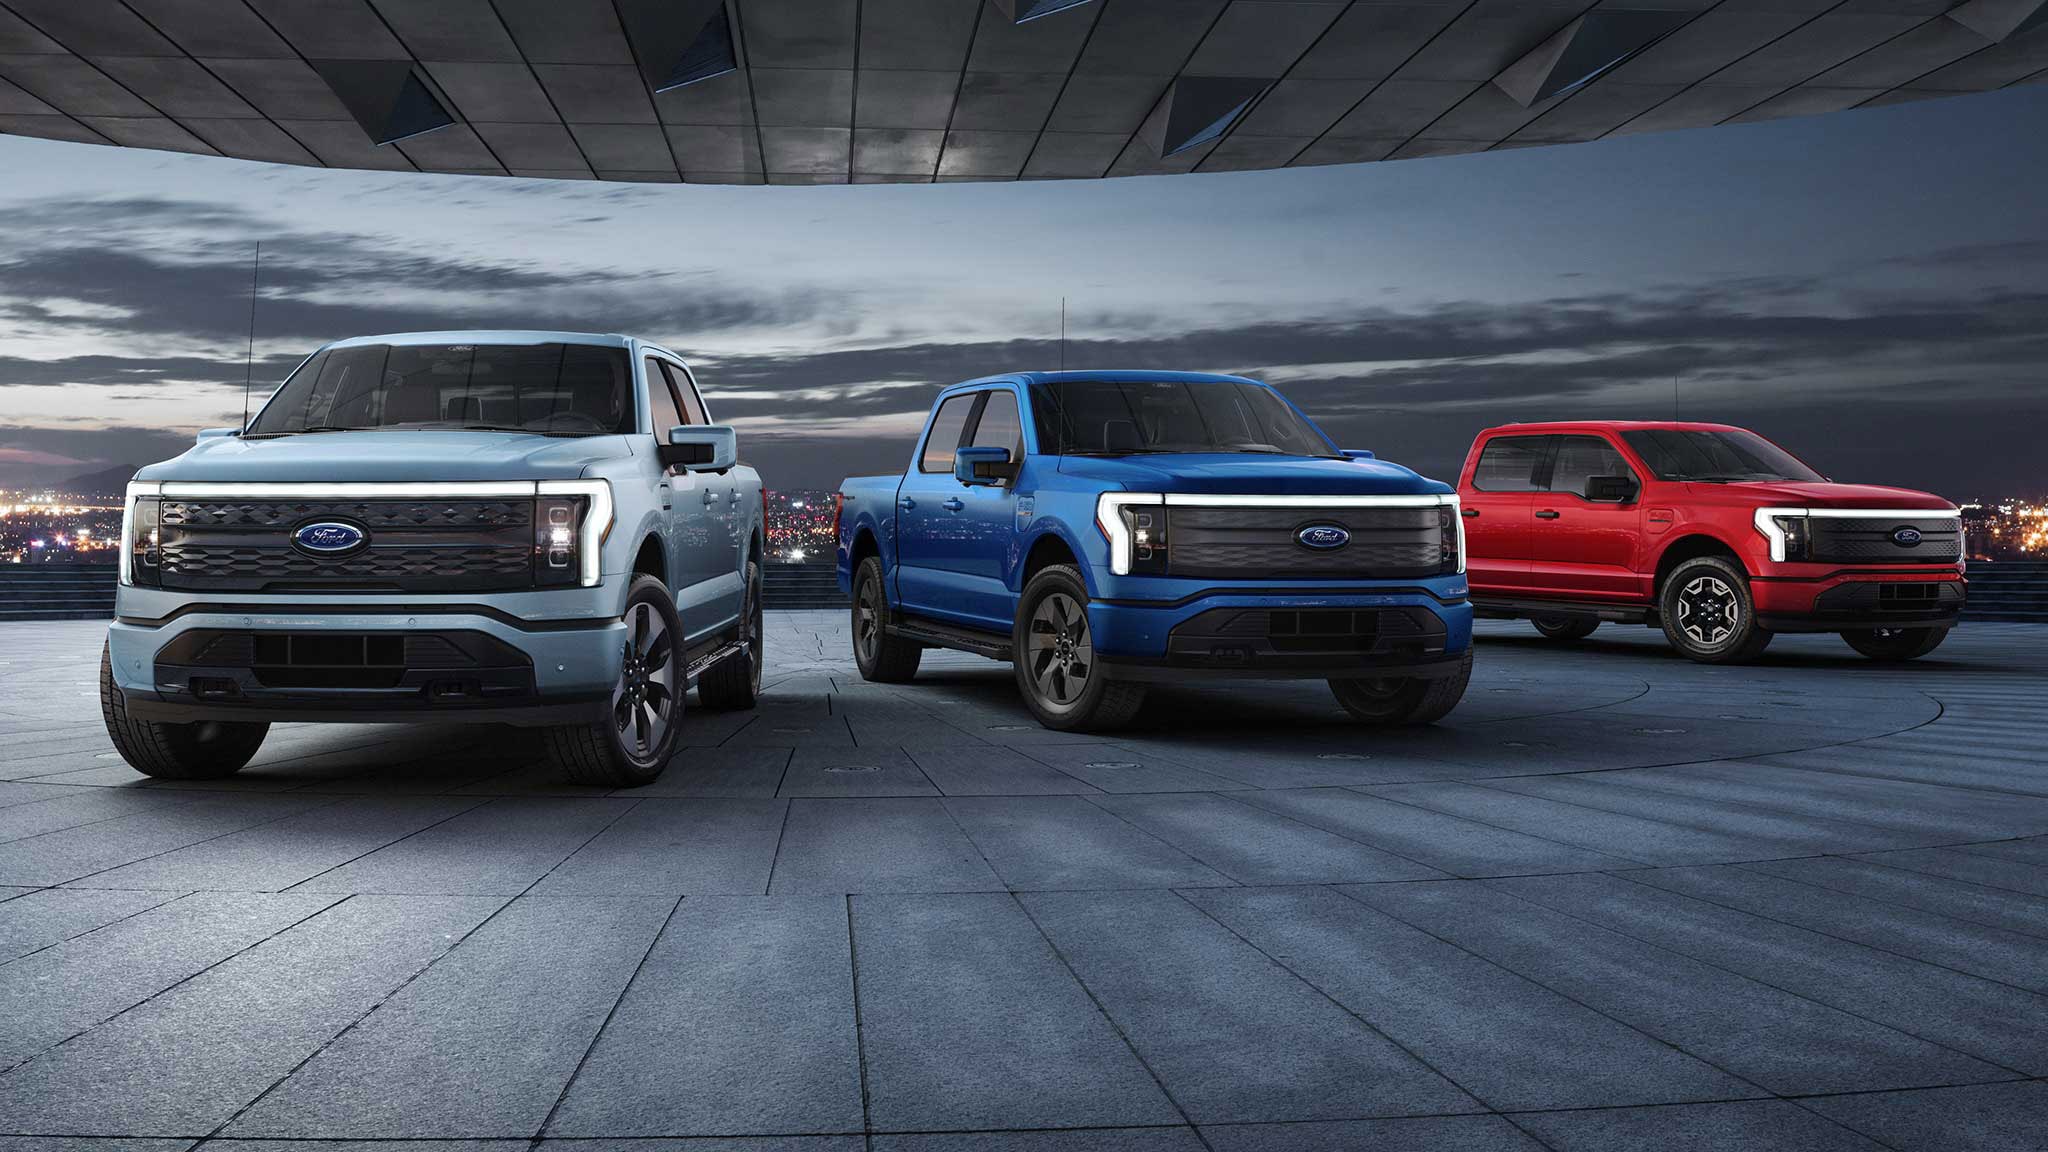 Ford announces their brand new electric truck